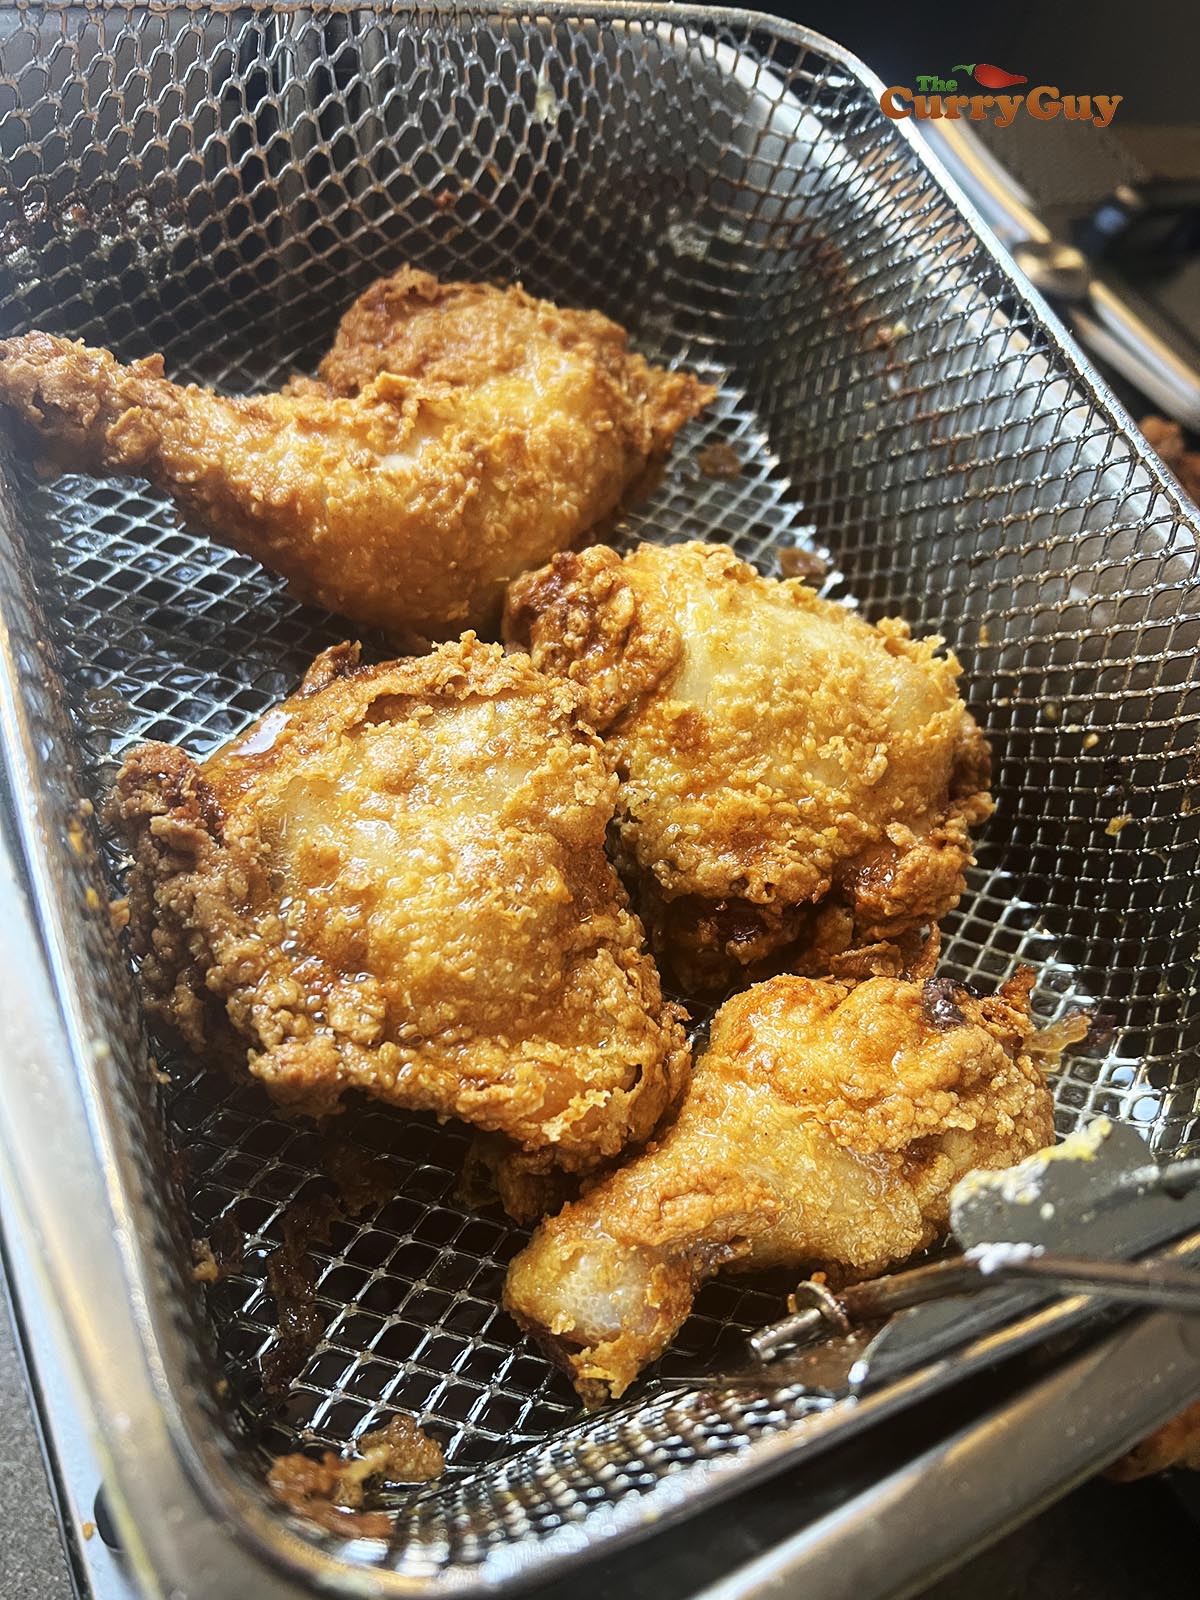 Finished Indian fried chicken